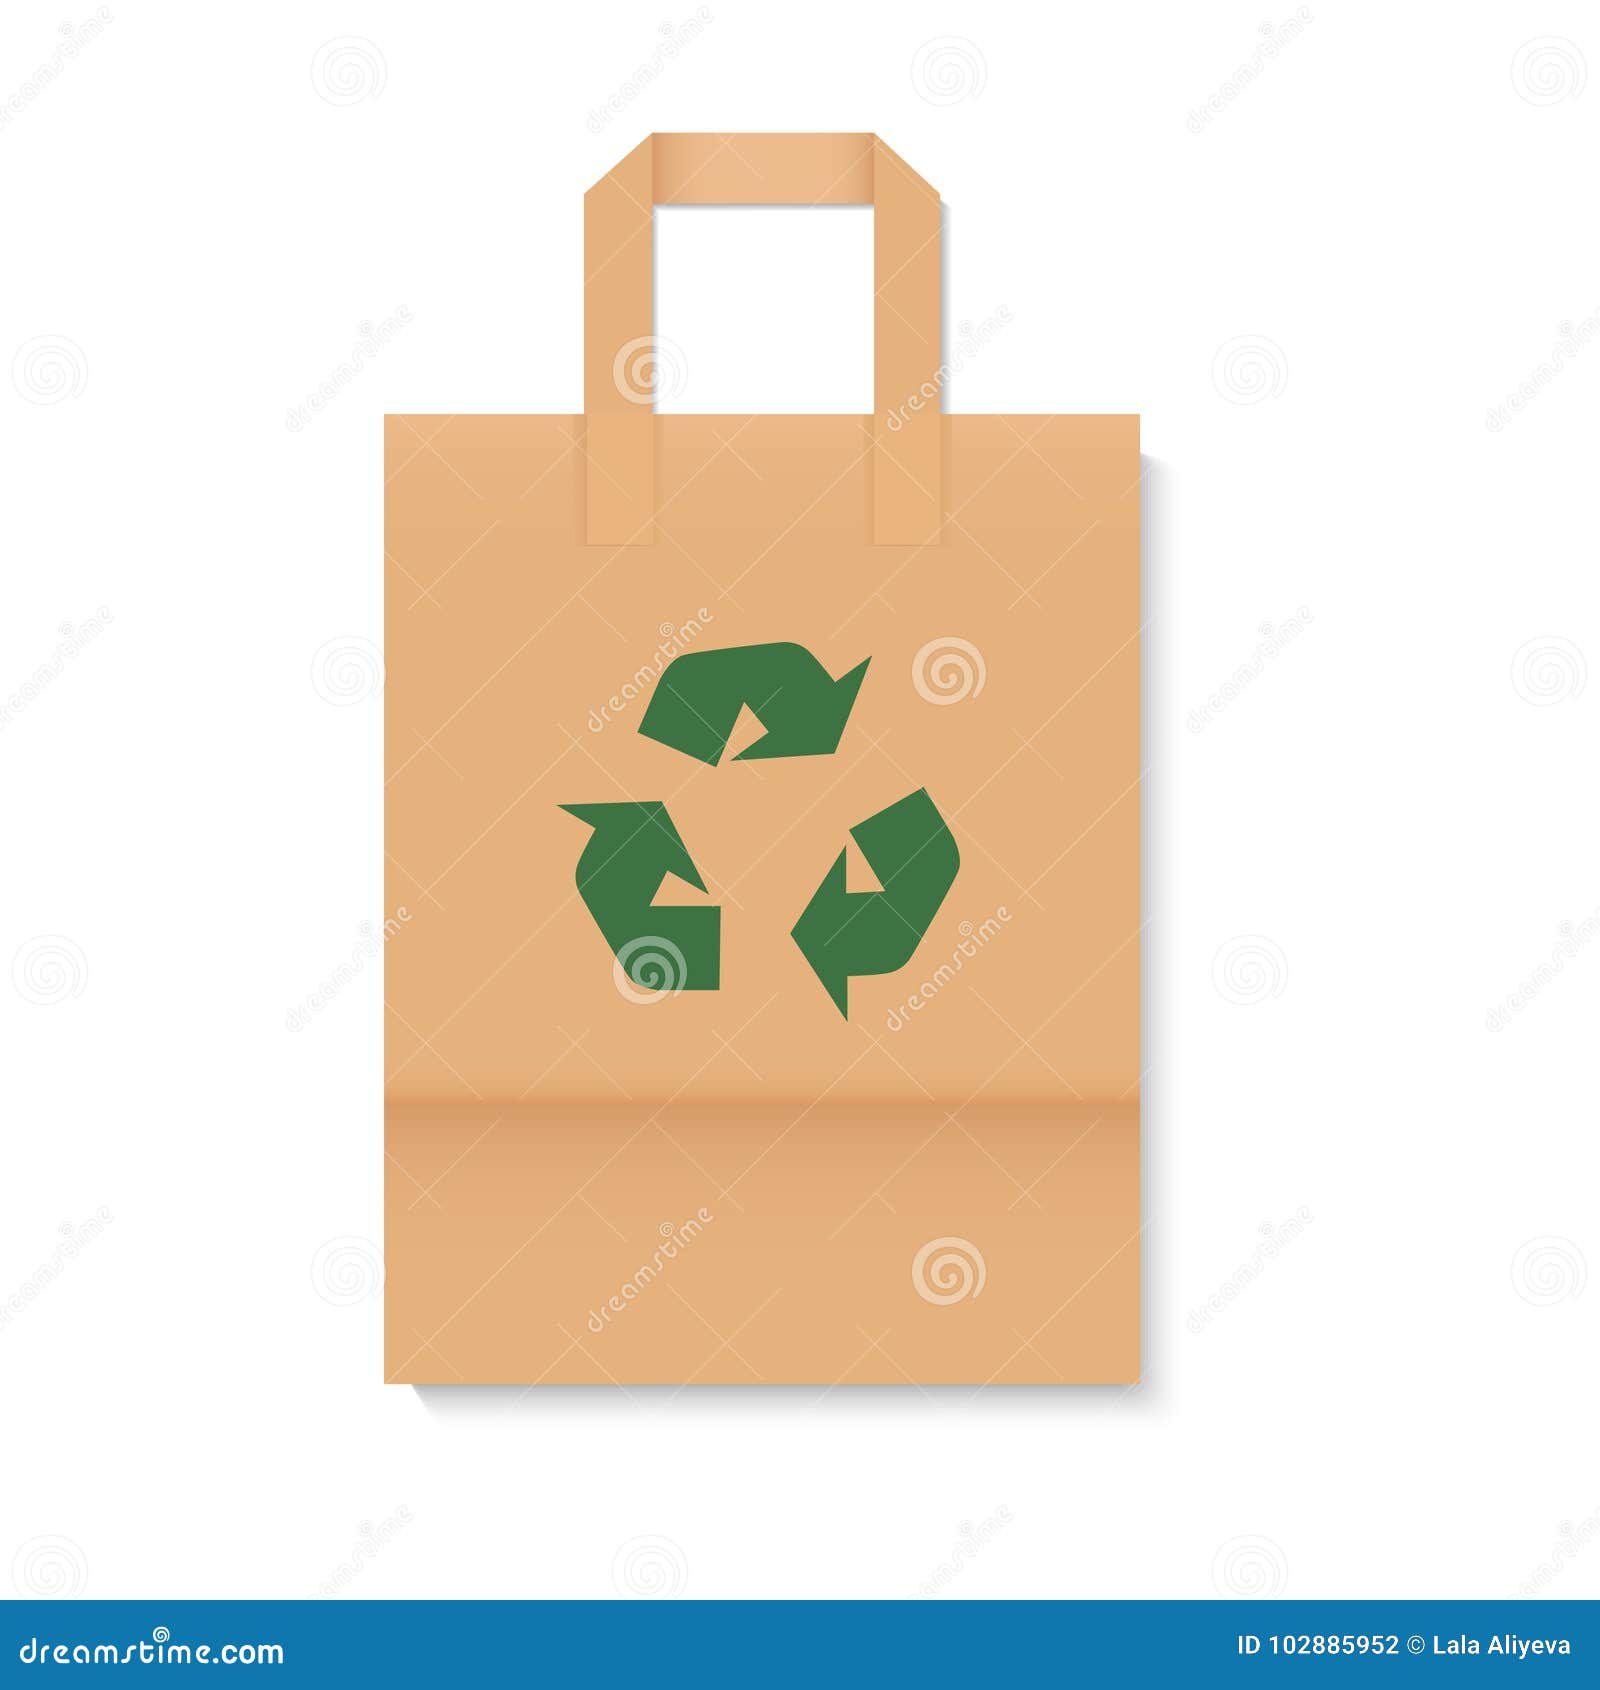 Download Blank Realistic Paper Bag For Recycle Mockup. Vector ...